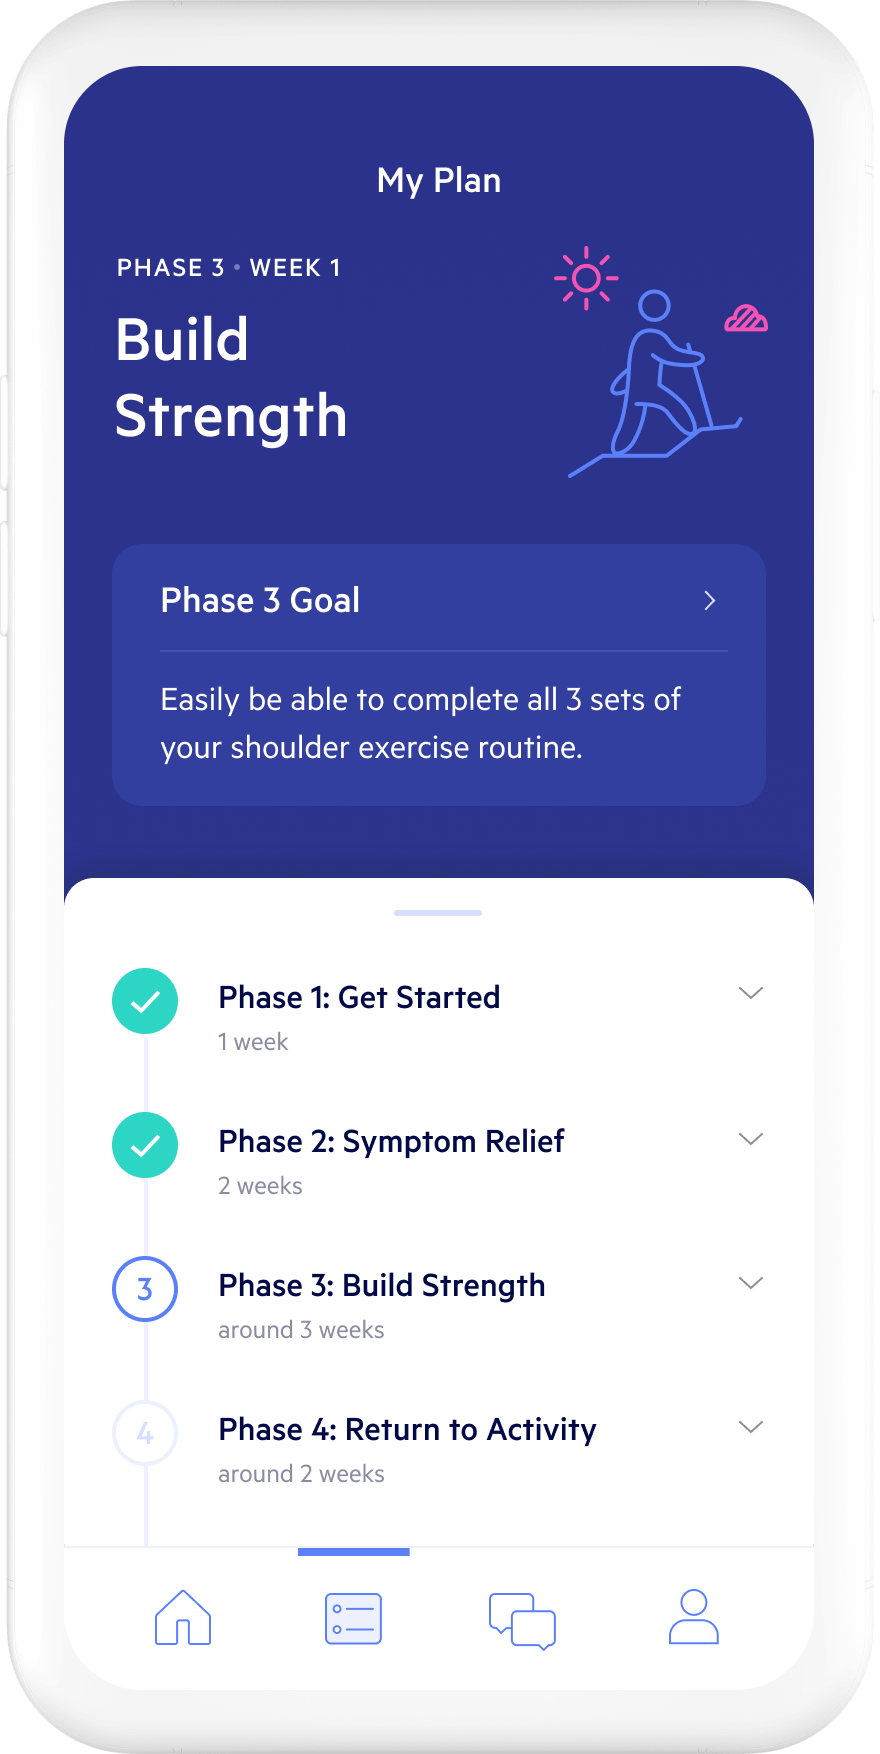 Image of in-app Omada care plan for prevention